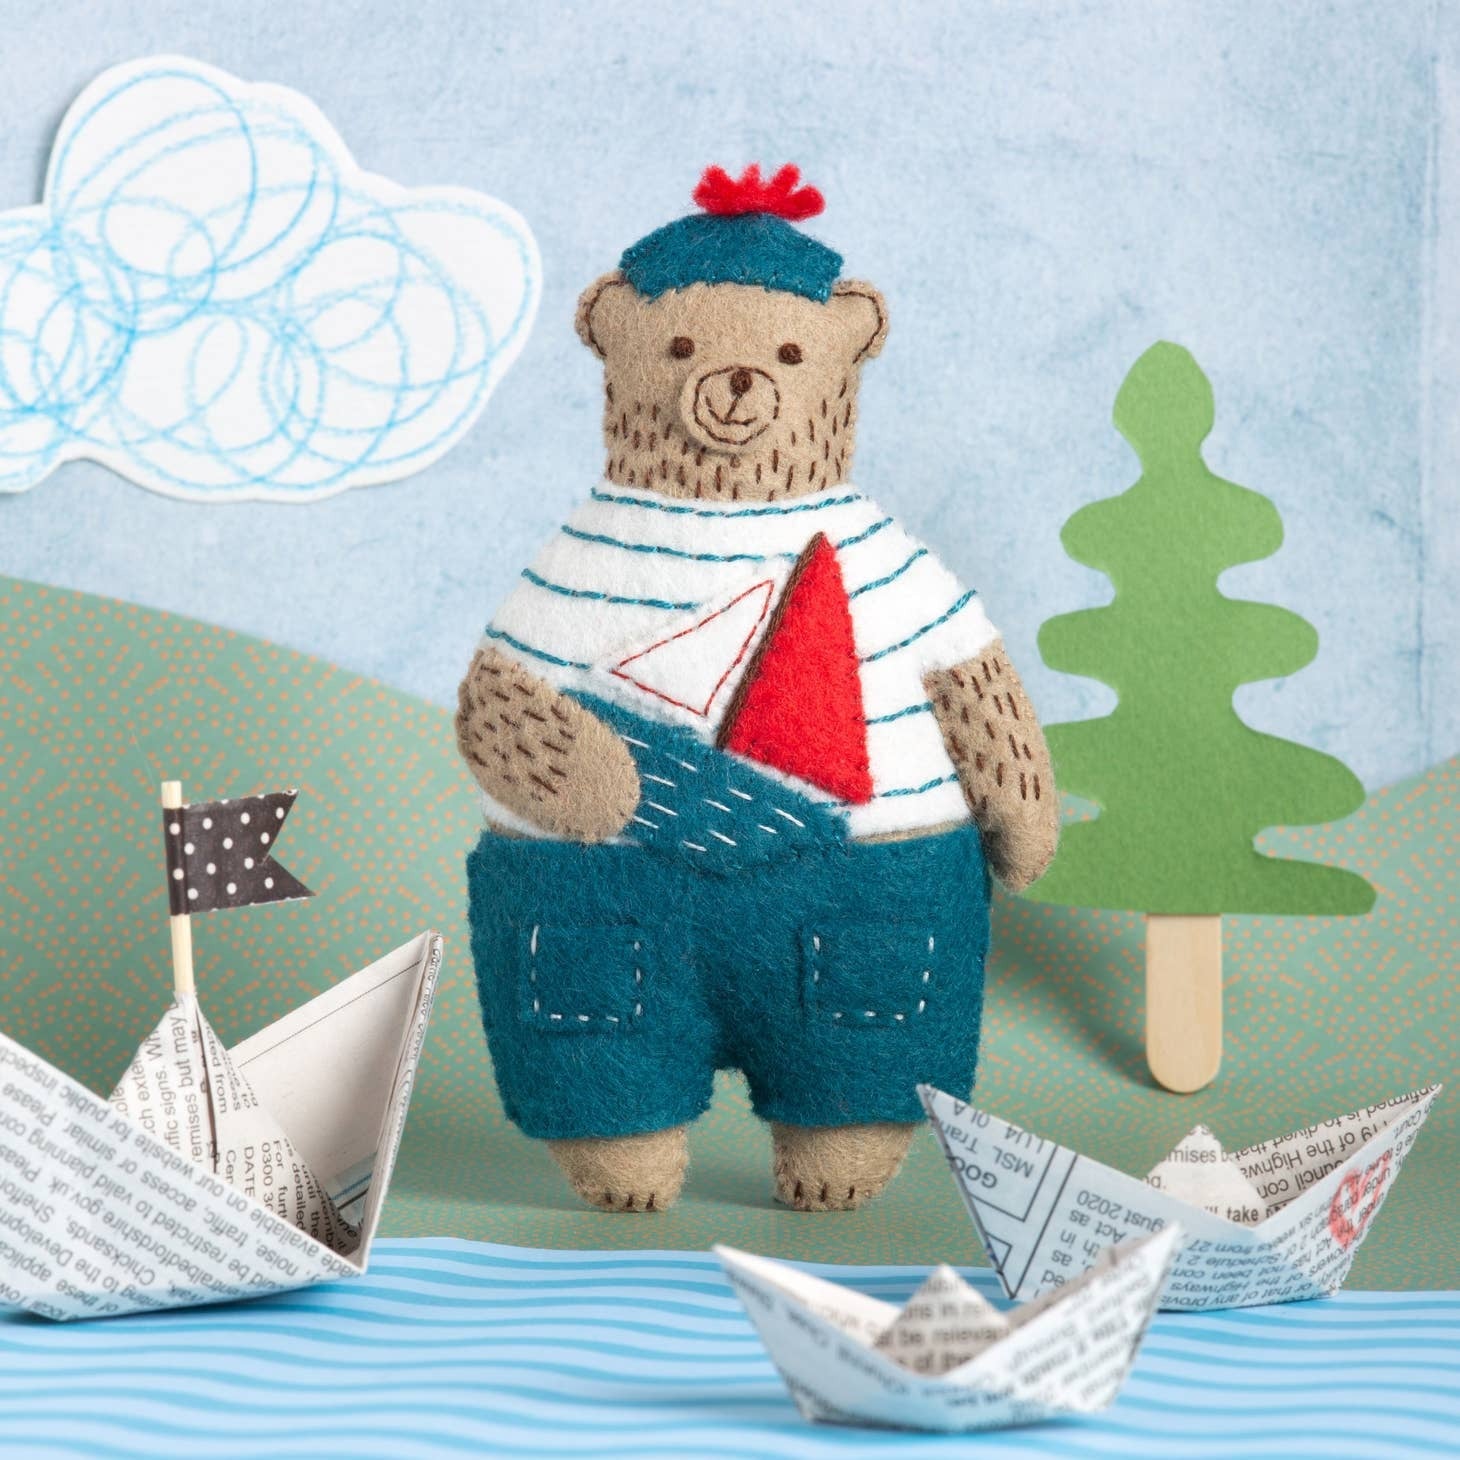 Handcrafted nautical scene featuring Marcel Bear in sailor attire surrounded by origami boats and whimsical felt landscape.